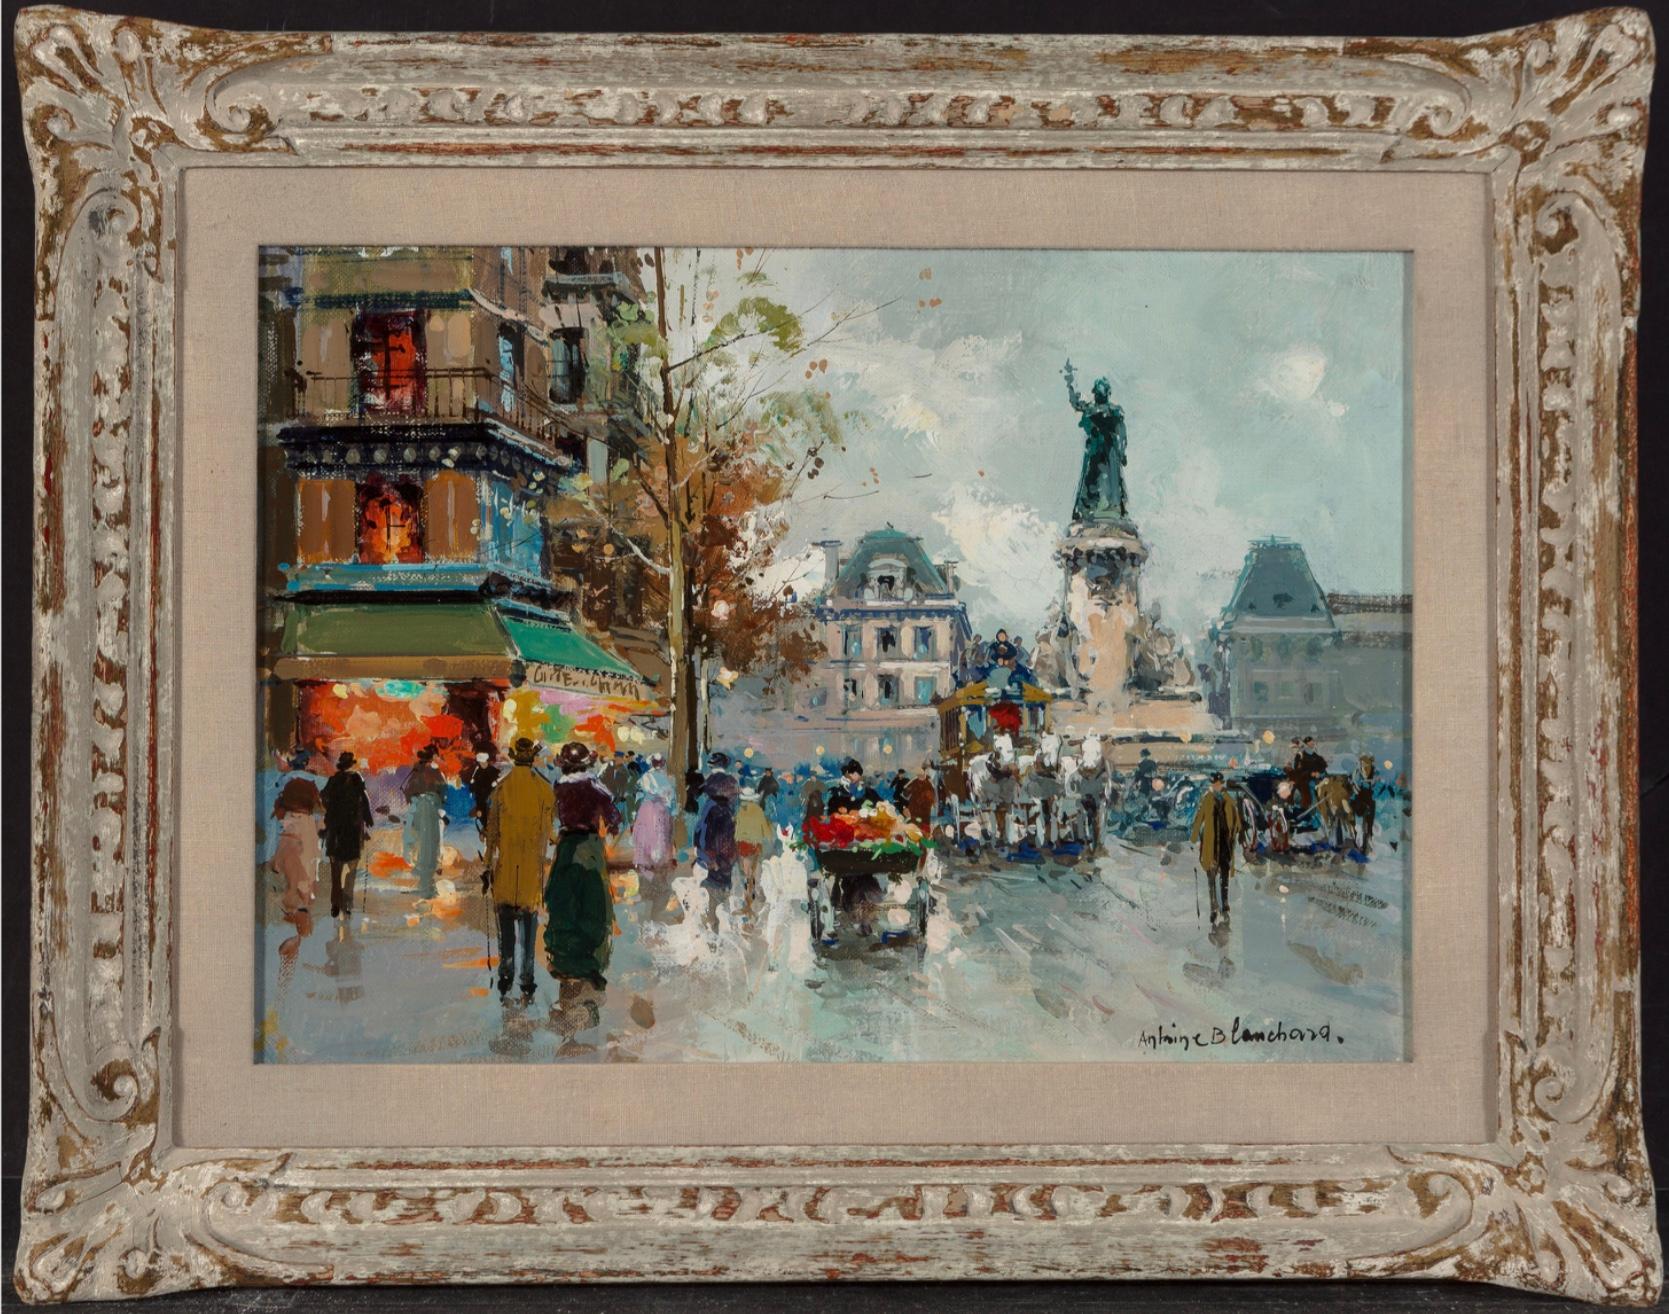 Antoine Blanchard (French, 1910-1988), circa 1955

A midcentury impressionist painting of a Paris street scene near Place De La Republique with horse drawn carriages and flower venders. The Republique statue point the way as pedestrians walk along